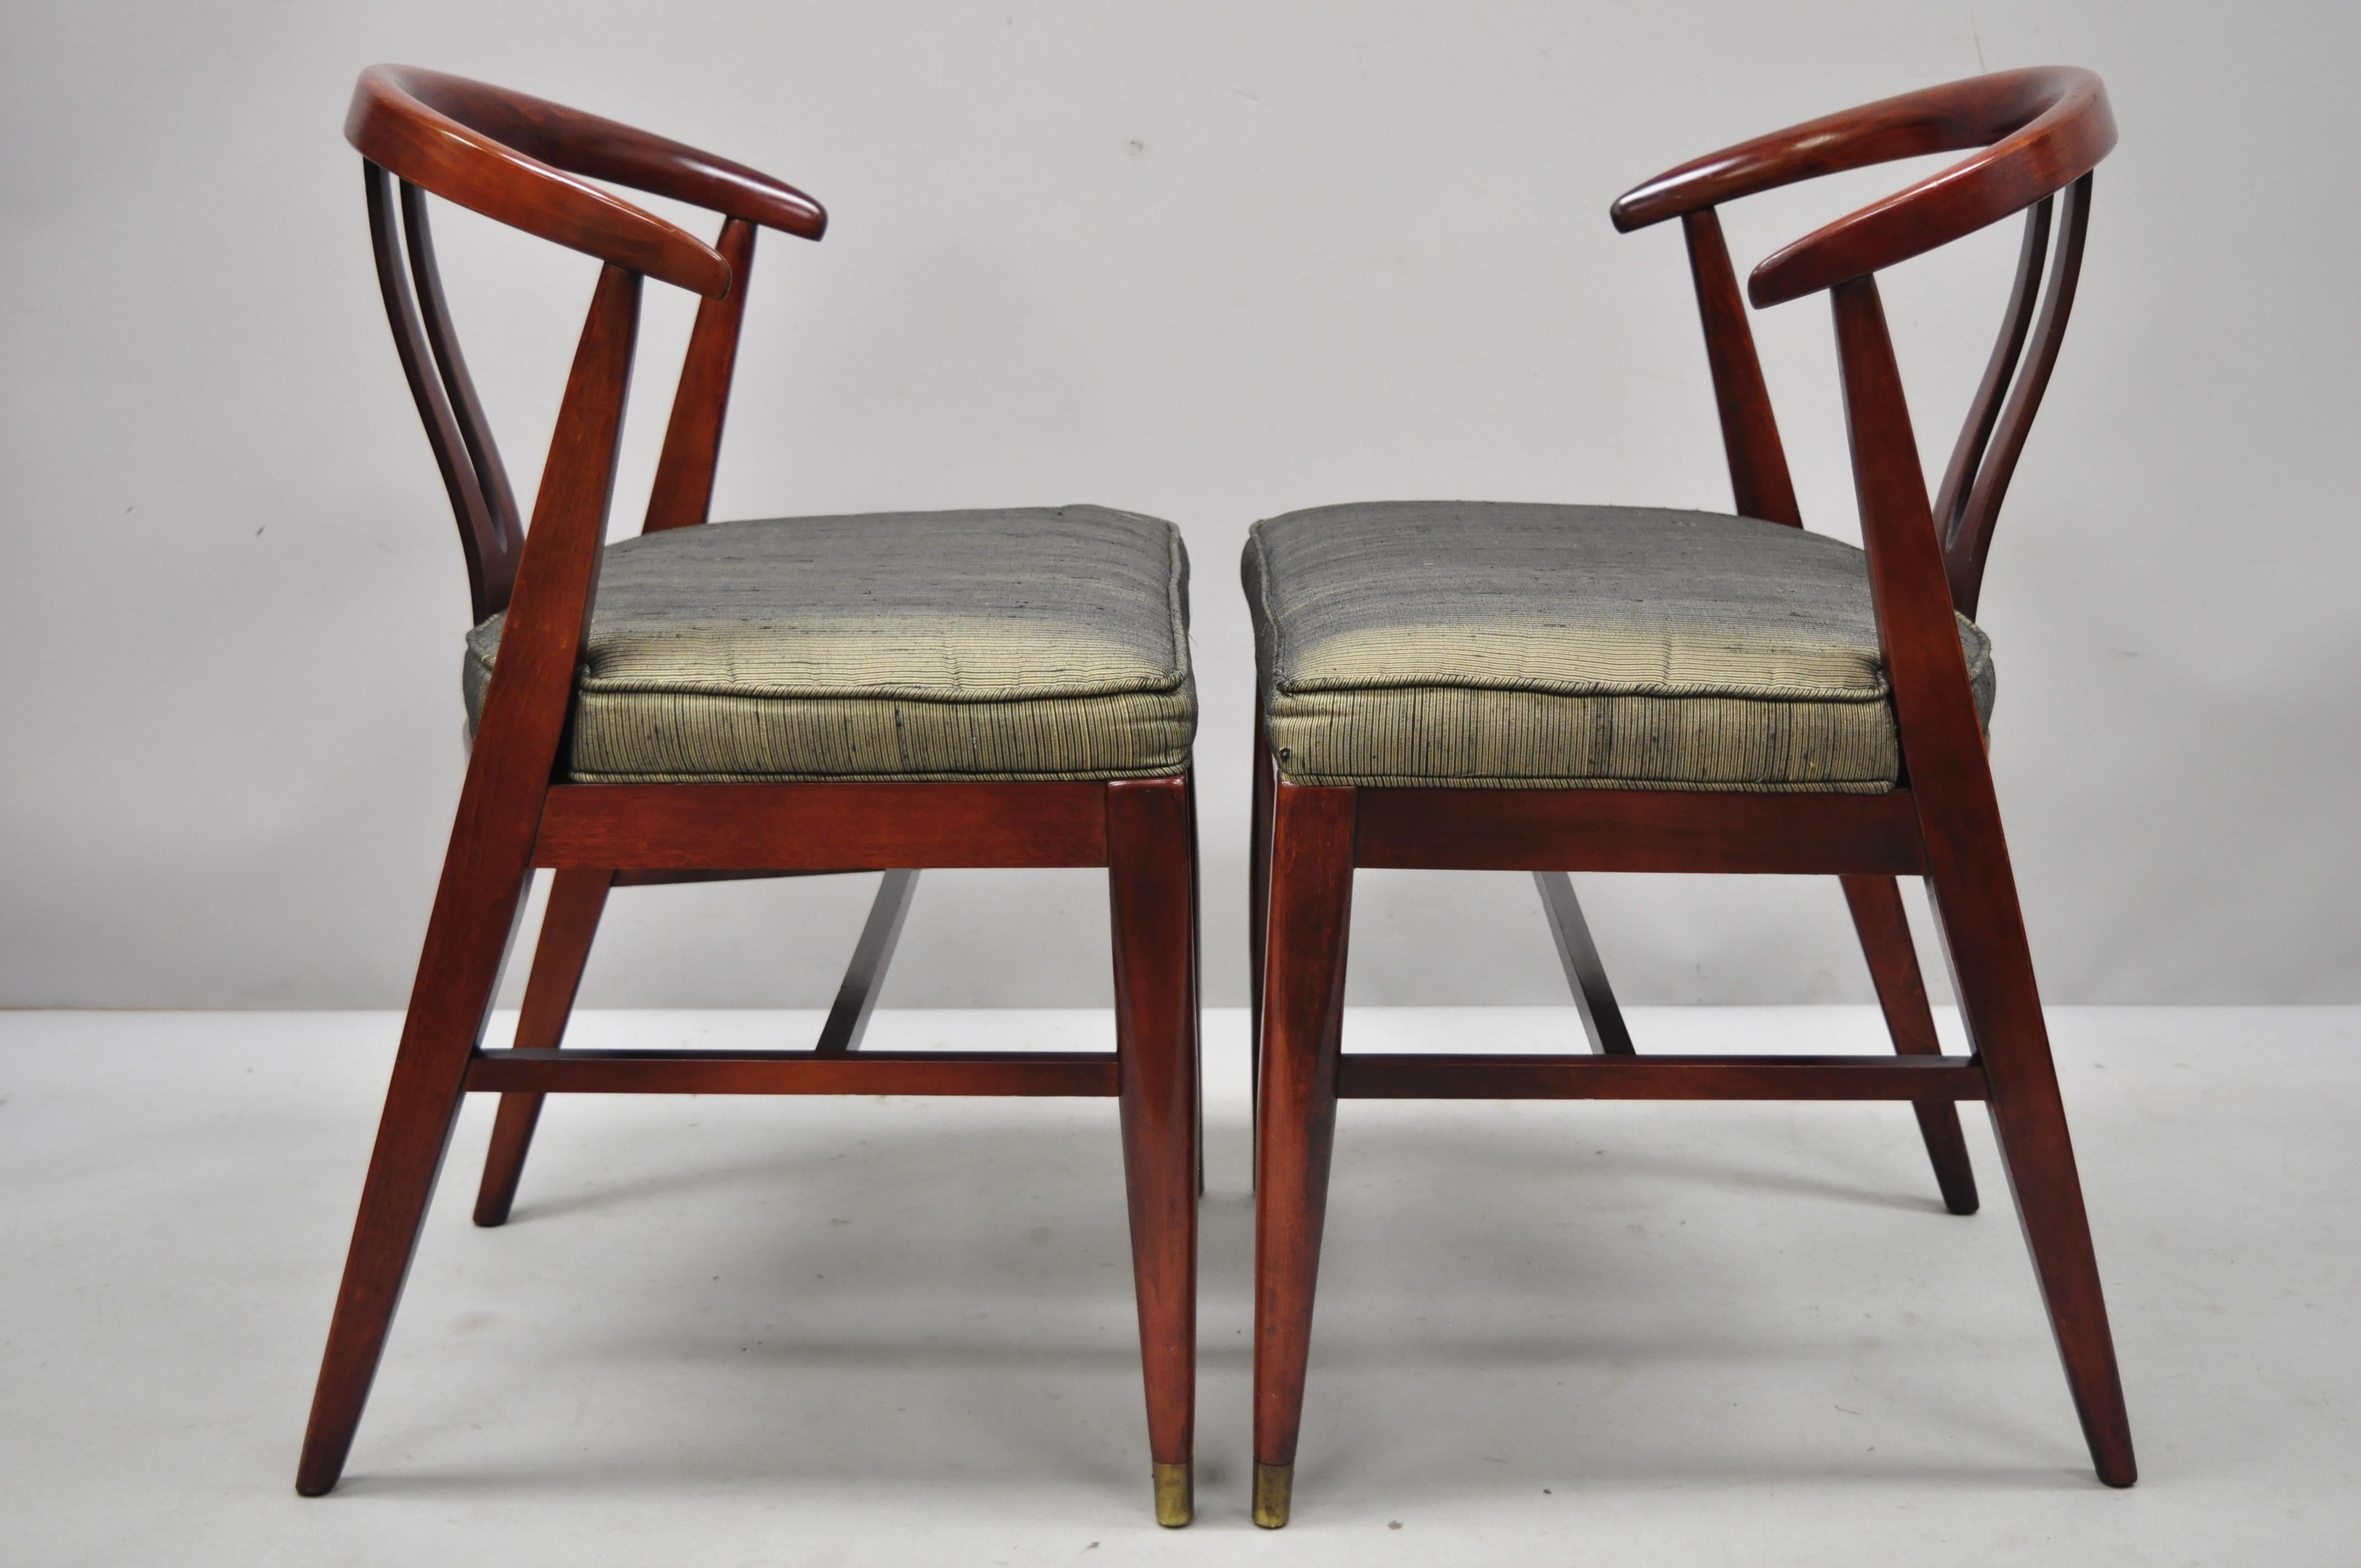 Pair of vintage Mid-Century Modern horseshoe curved back mahogany dining chairs.
Listing includes unique finger joinery, sleek curved back, circa mid-20th century. Measurements: 31.5